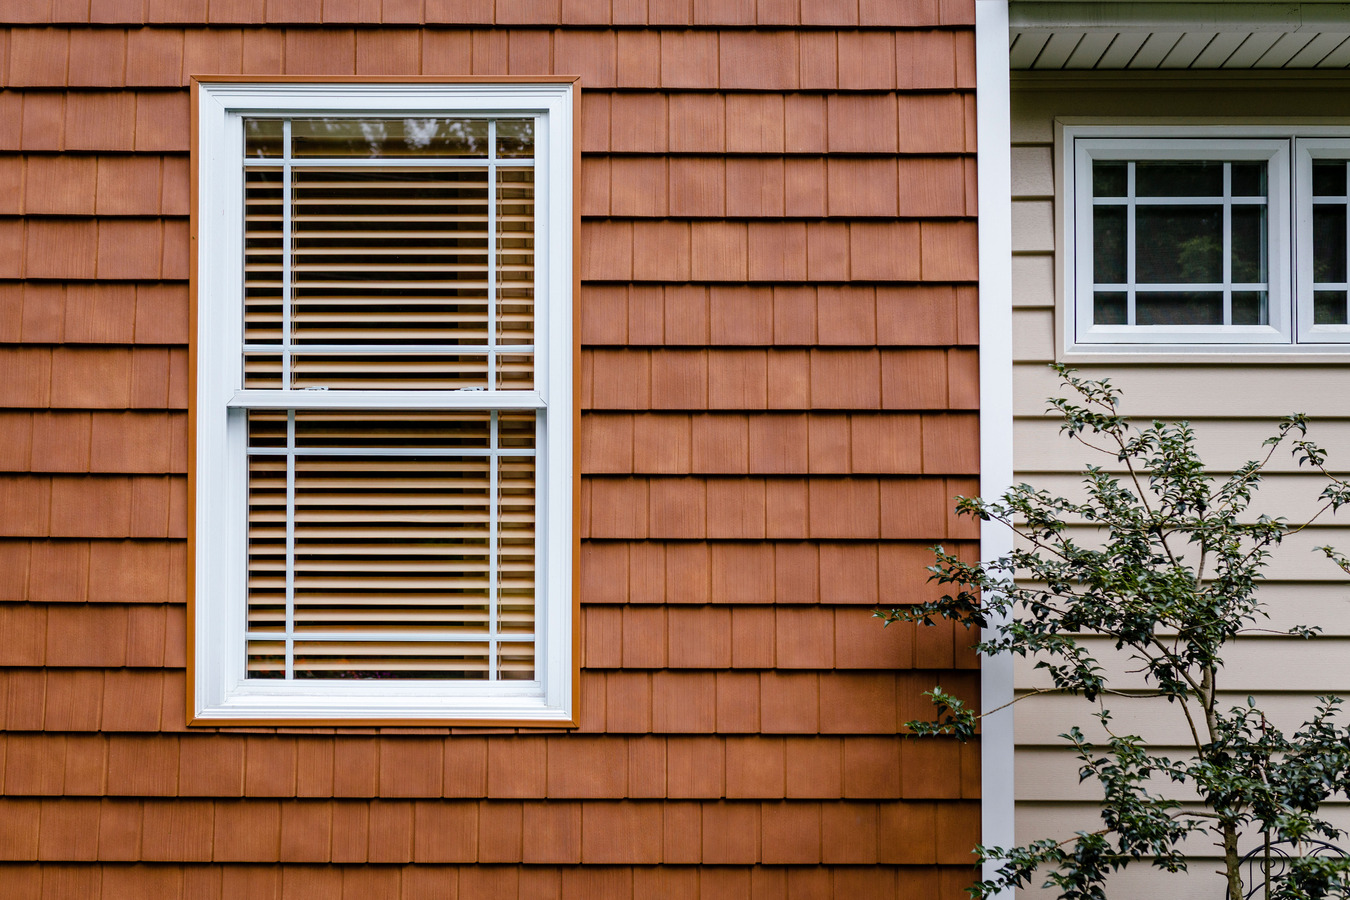 How to Avoid Streaks When Cleaning Your Windows